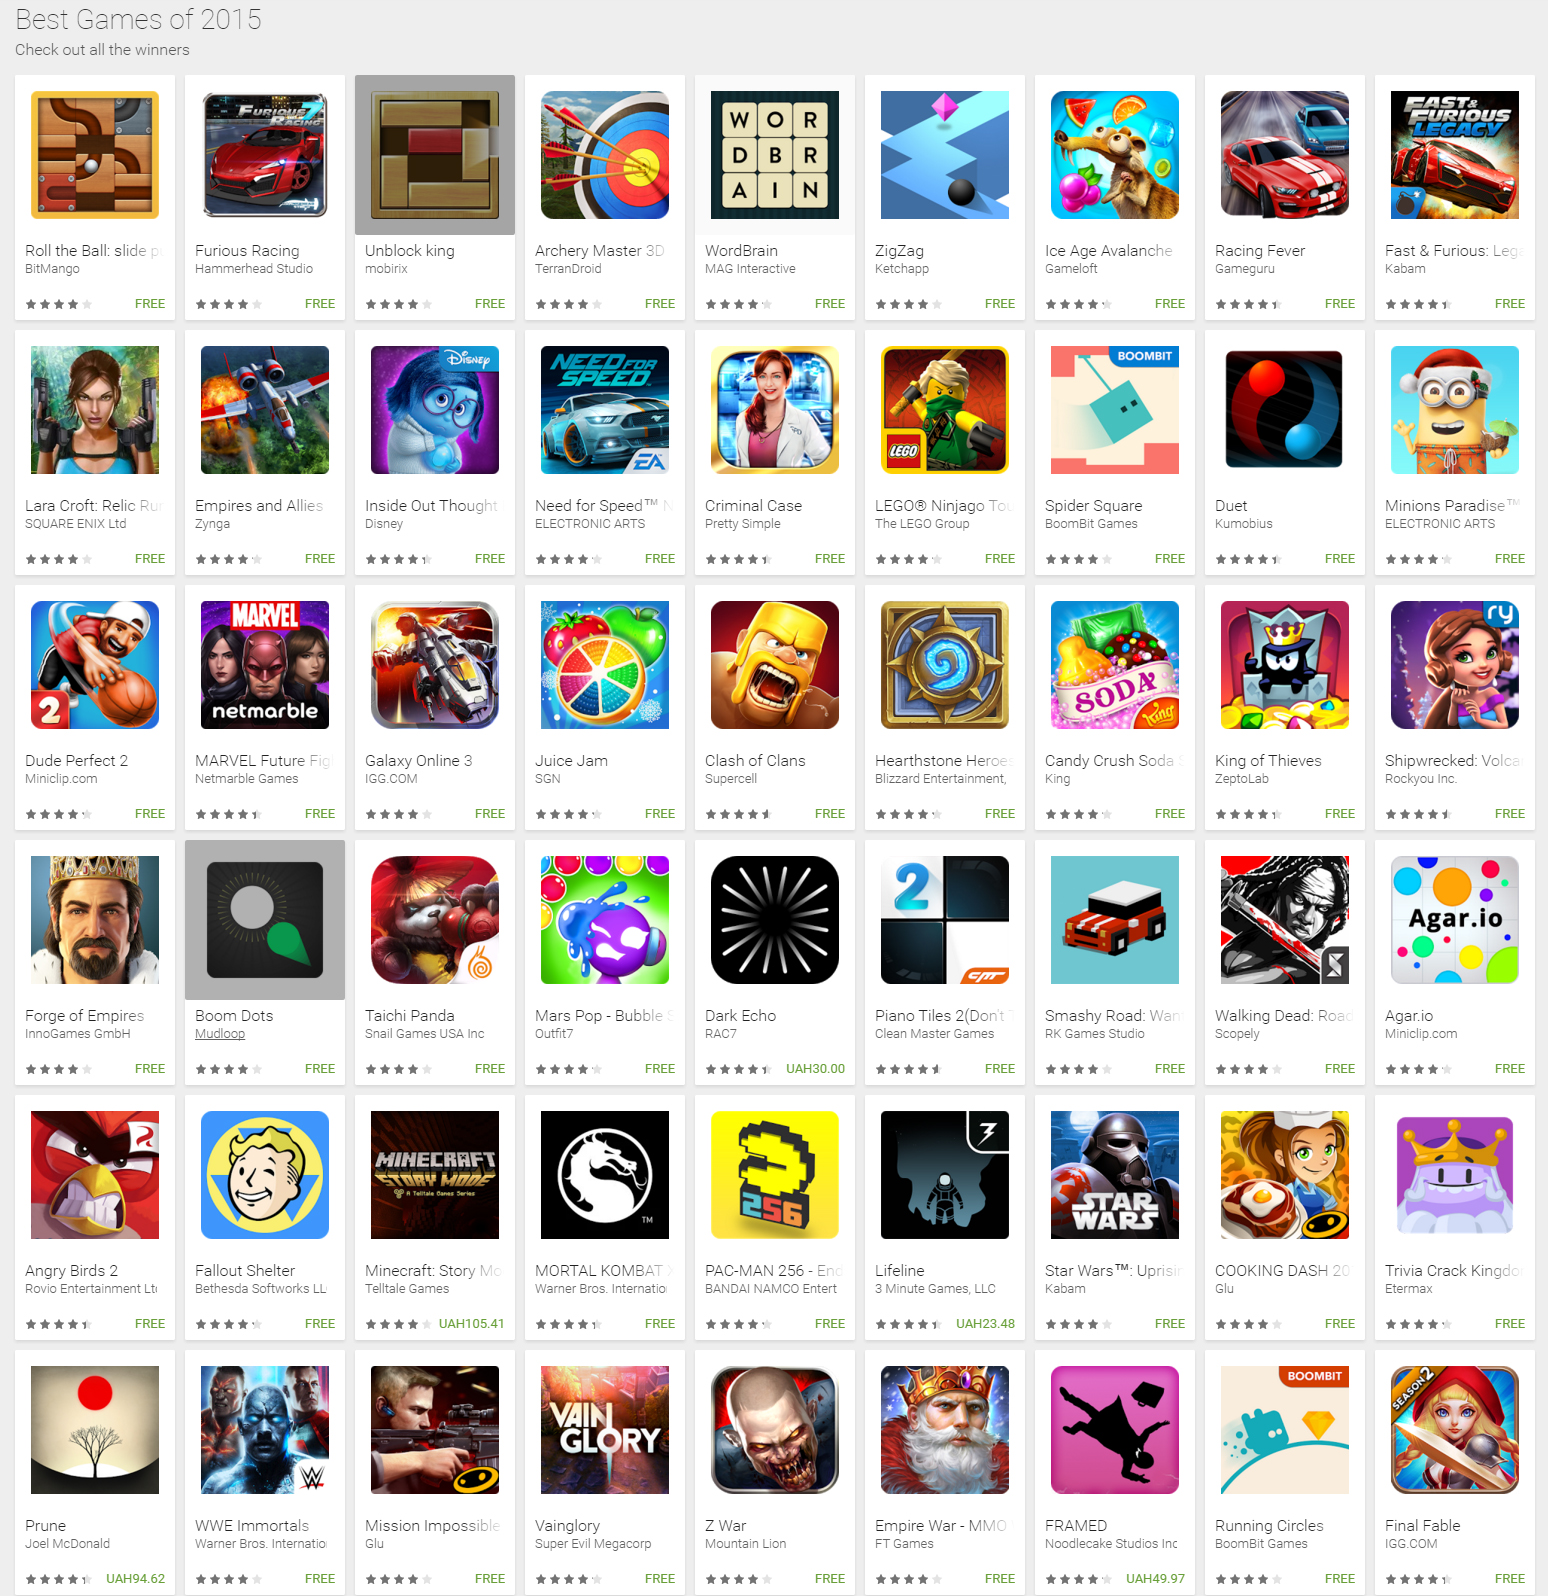 ay Store publishes lists of the best apps best games of 2015